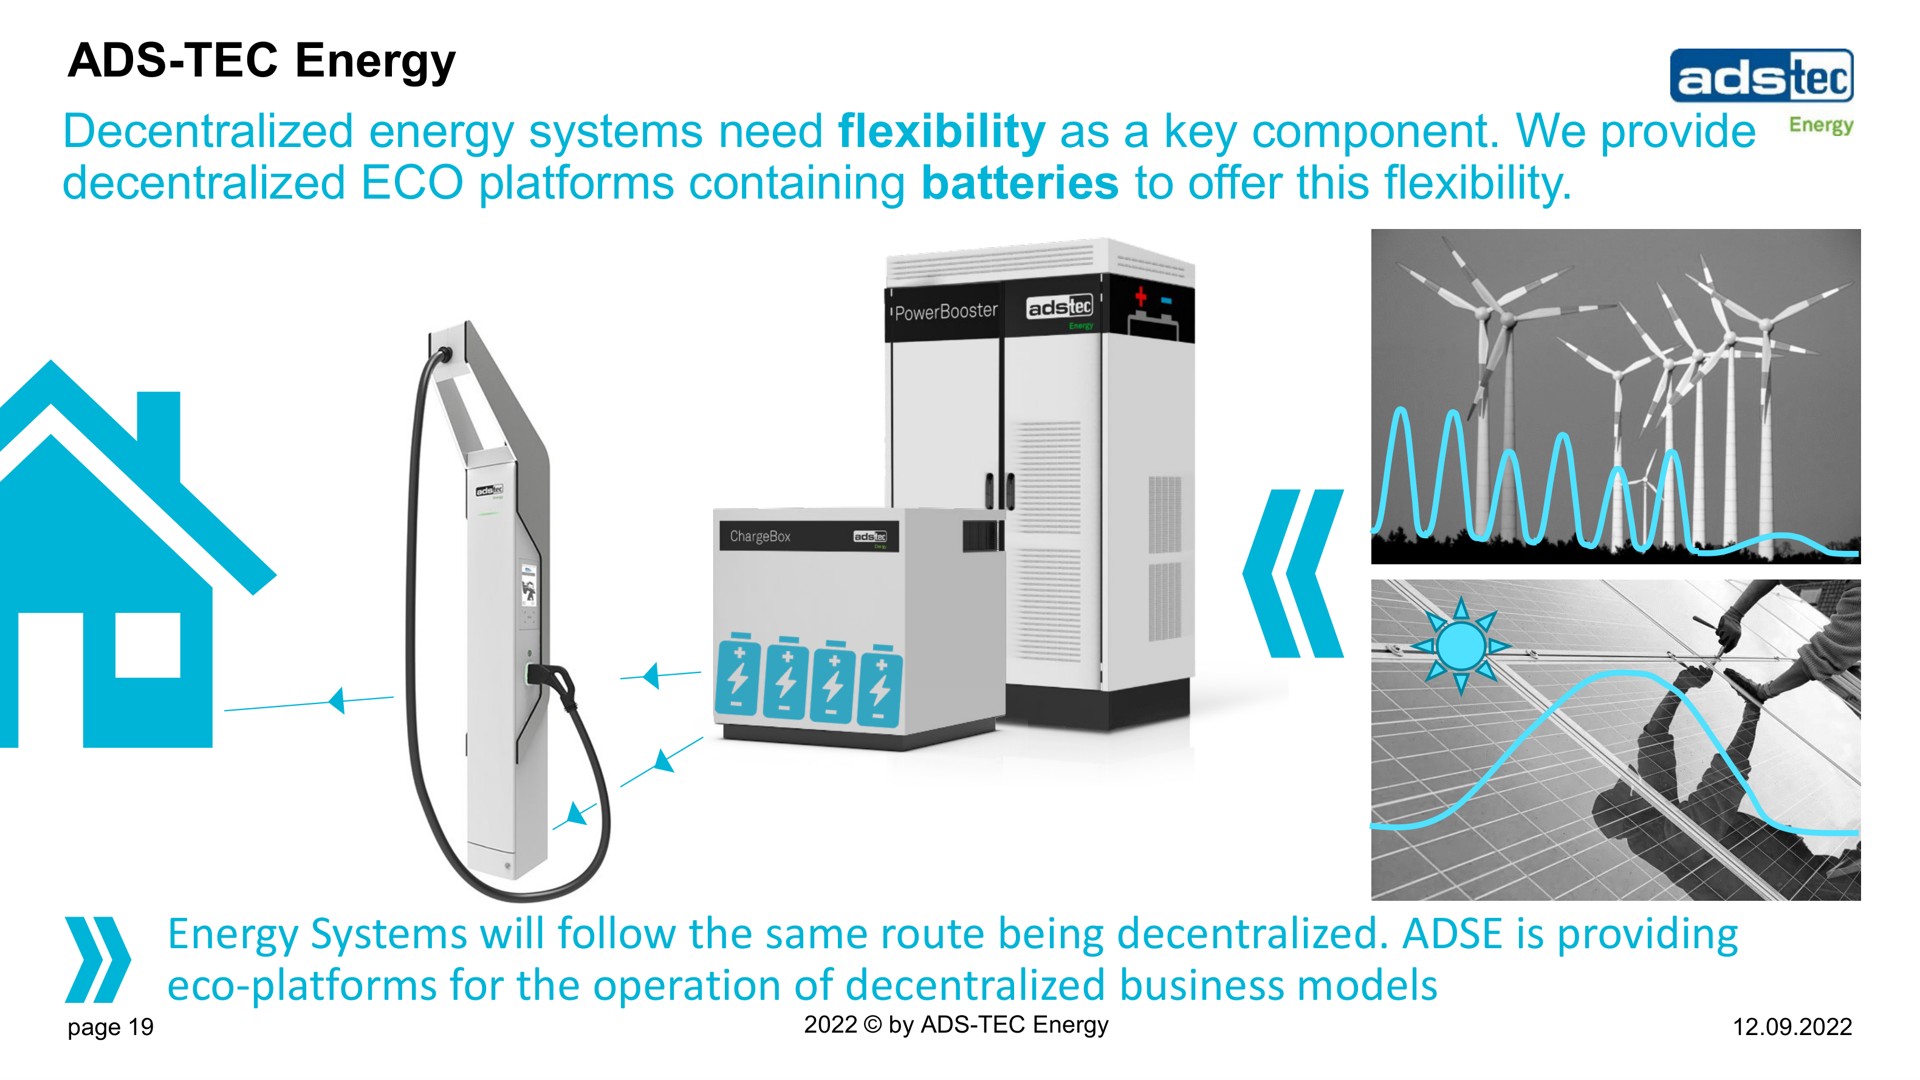 ads tec energy decentralized energy systems need flexibility as a key component we provide decentralized platforms containing batteries to offer this flexibility energy systems will follow the same route being decentralized is providing platforms for the operation of decentralized business models | ads-tec Energy